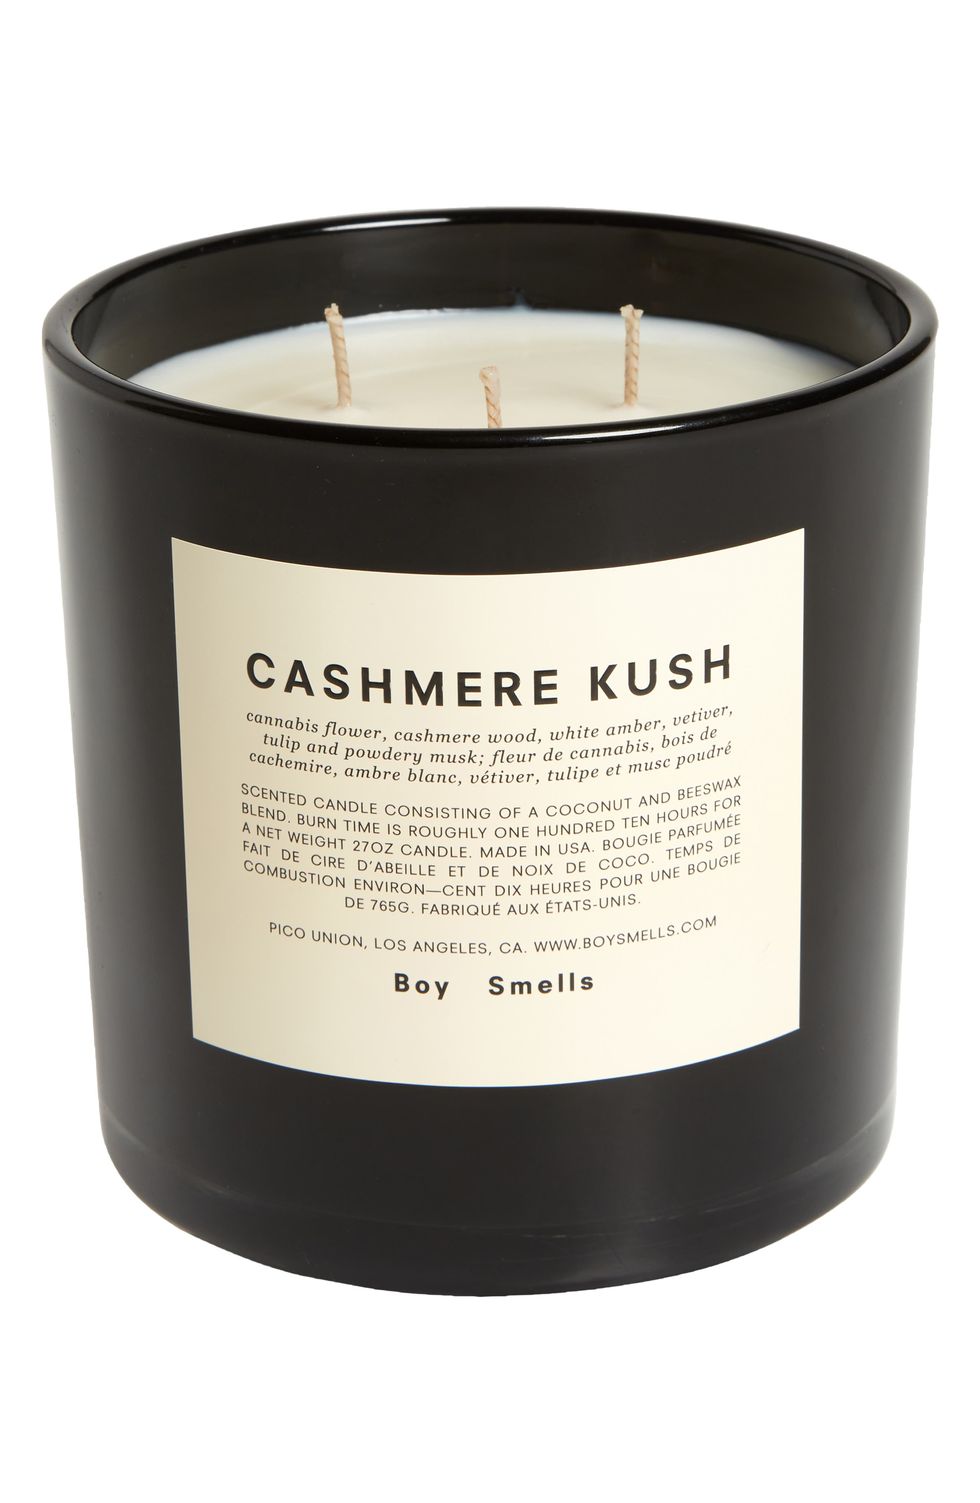 The Best Scented Candles For Every Room In Your House